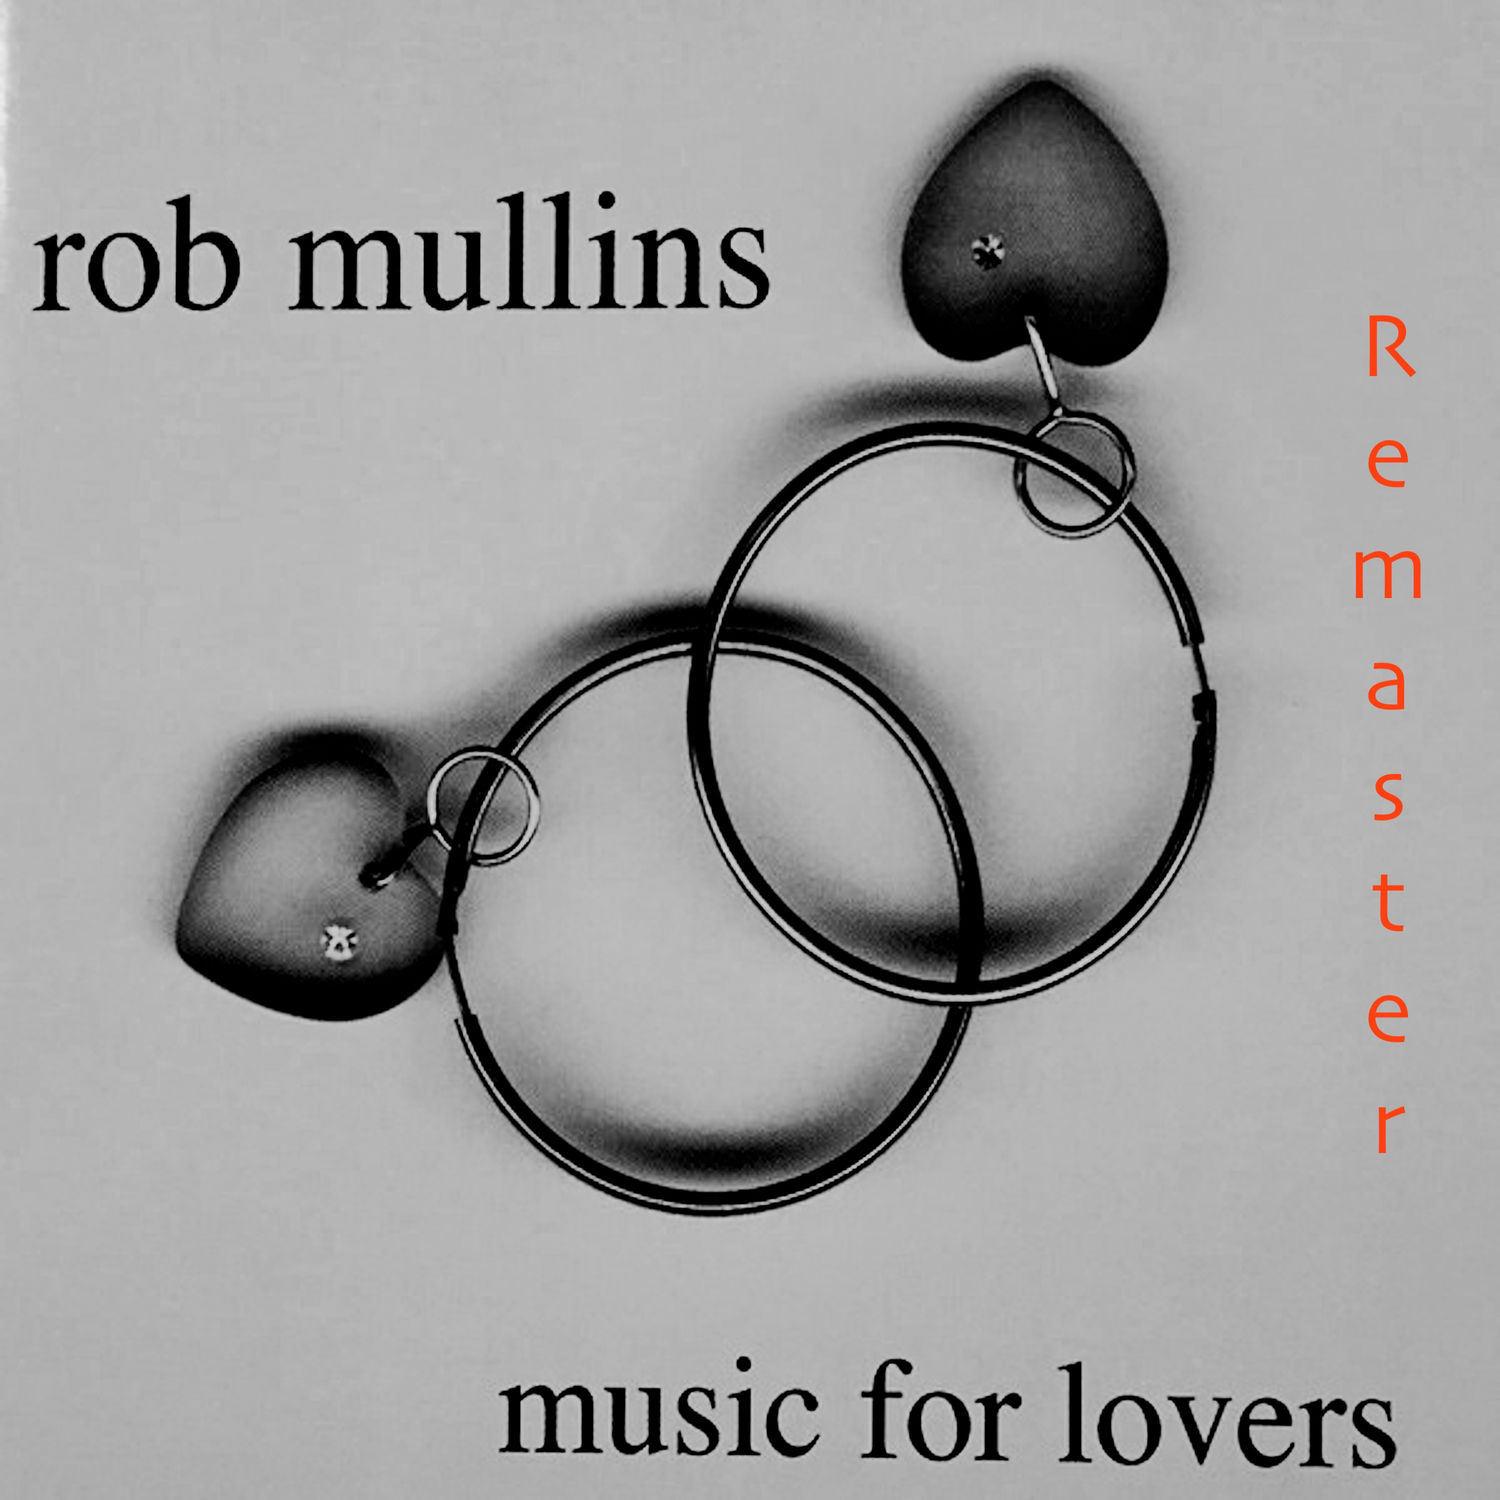 Rob Mullins - Music for Lovers (Remaster) (2021) [FLAC 24bit/44,1kHz]